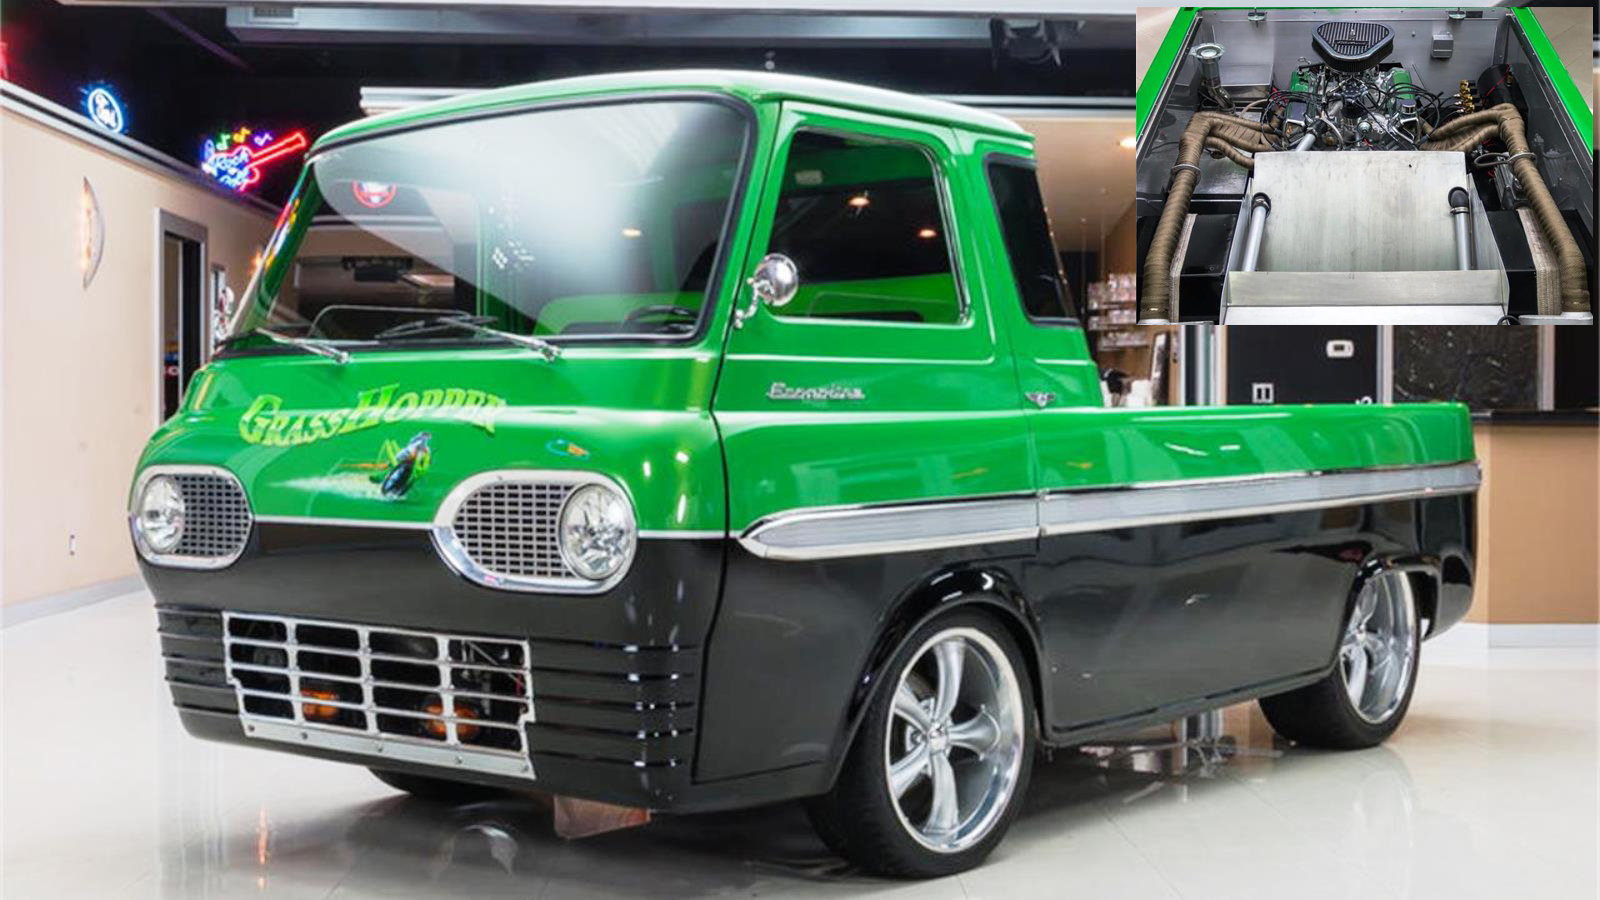 8 Facts About The 1965 Ford Econoline Spring Special Truck Ford Trucks 